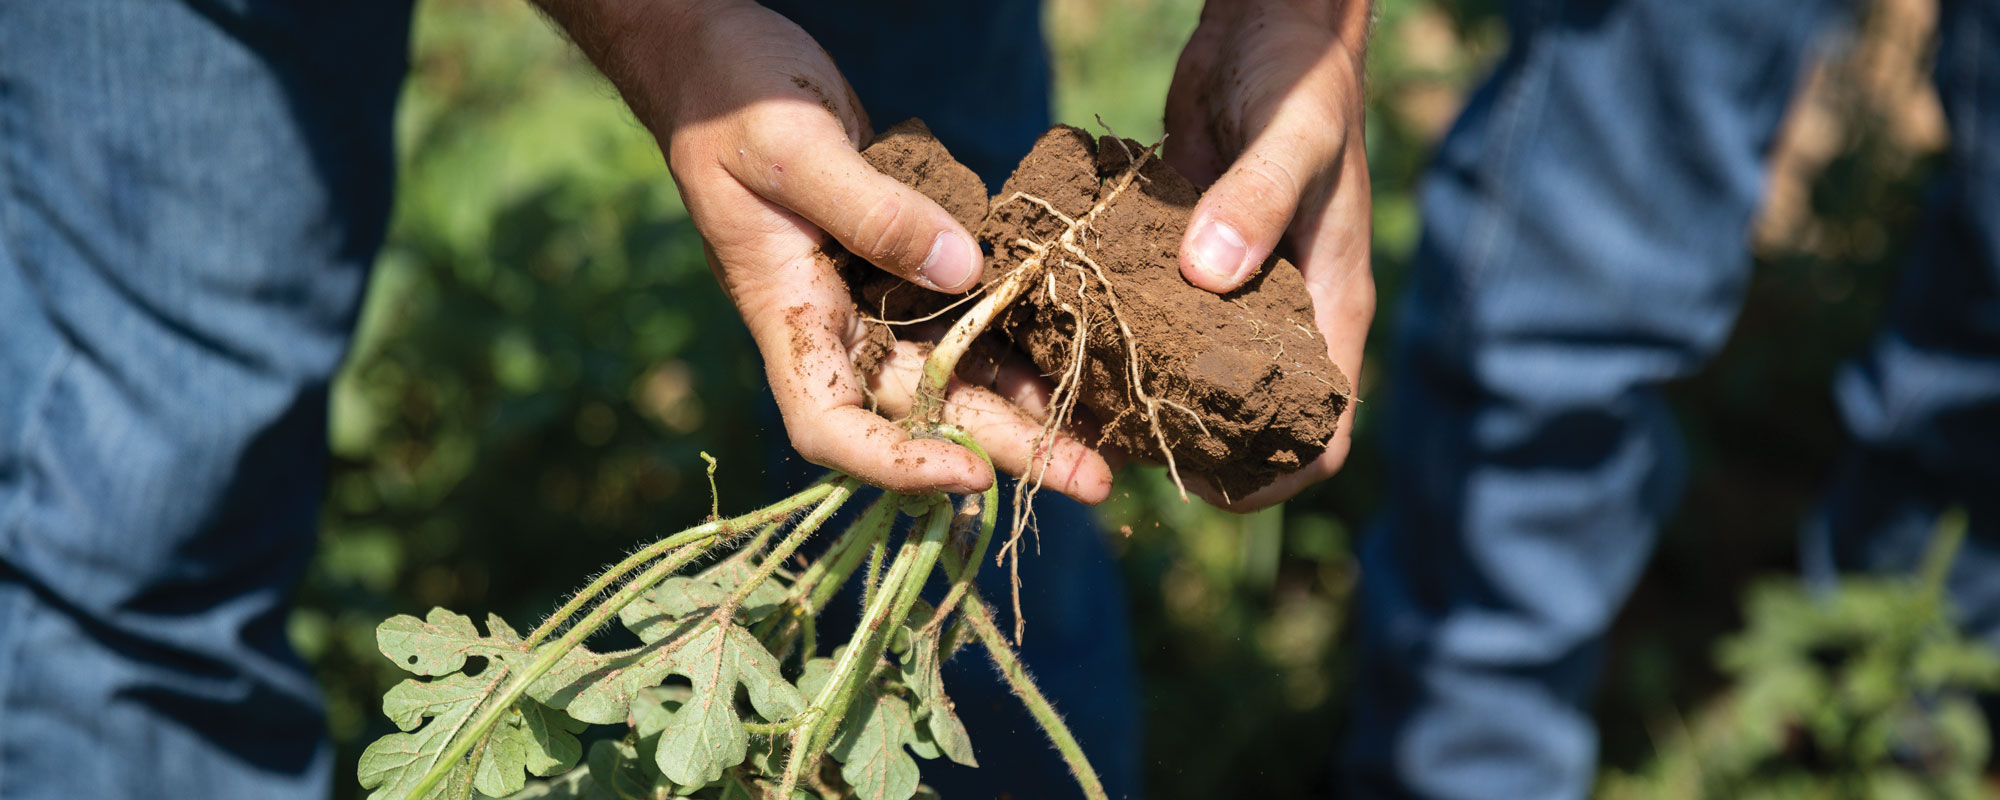 How to Evaluate Your Soil Right in the Field or Pasture